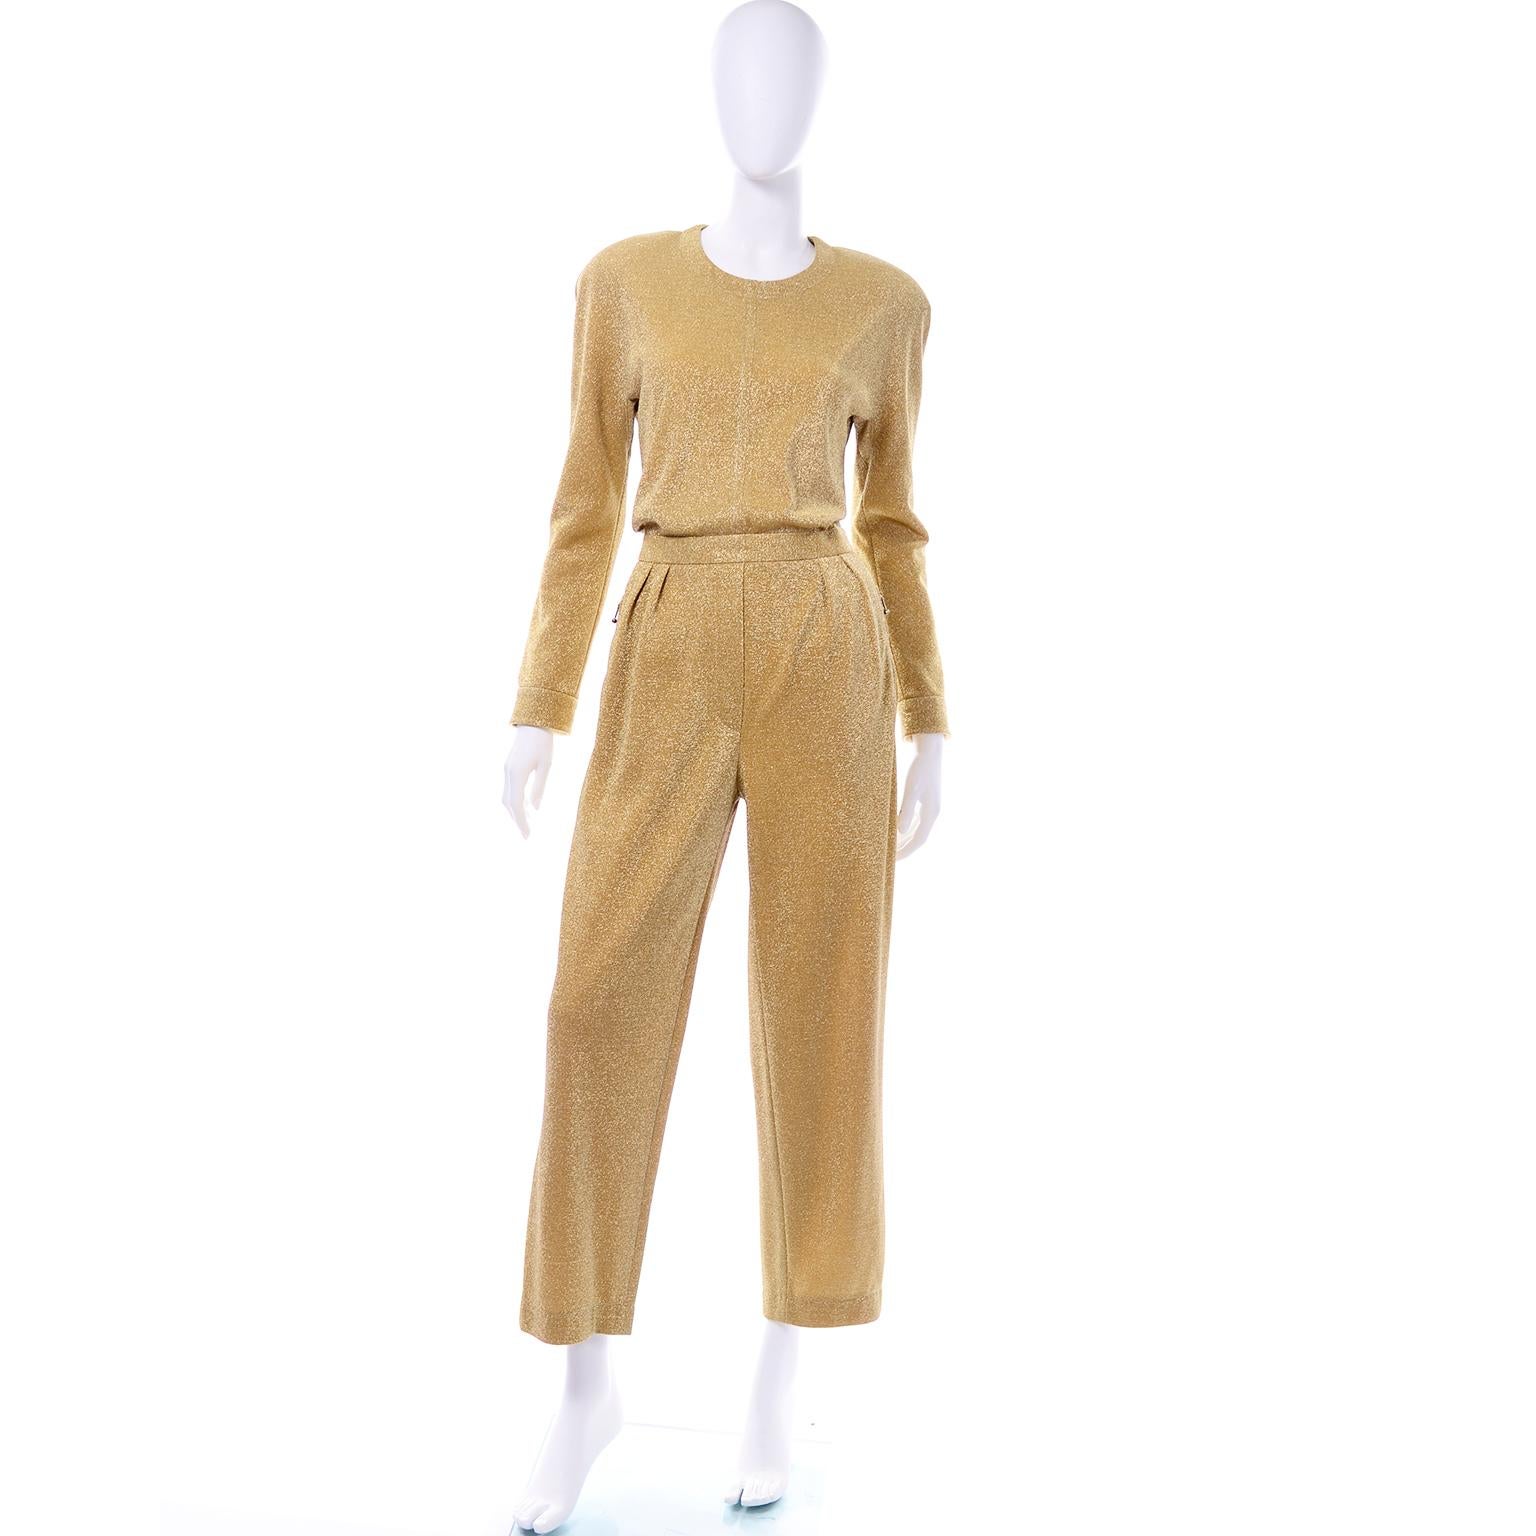 This jumpsuit gives us yet  another reason to love Margaretha Ley vintage pieces for Escada! This Escada jumpsuit would be  absolutely amazing for any holiday evening party as an evening dress alternative! The gold lurex shimmer gives this jumpsuit